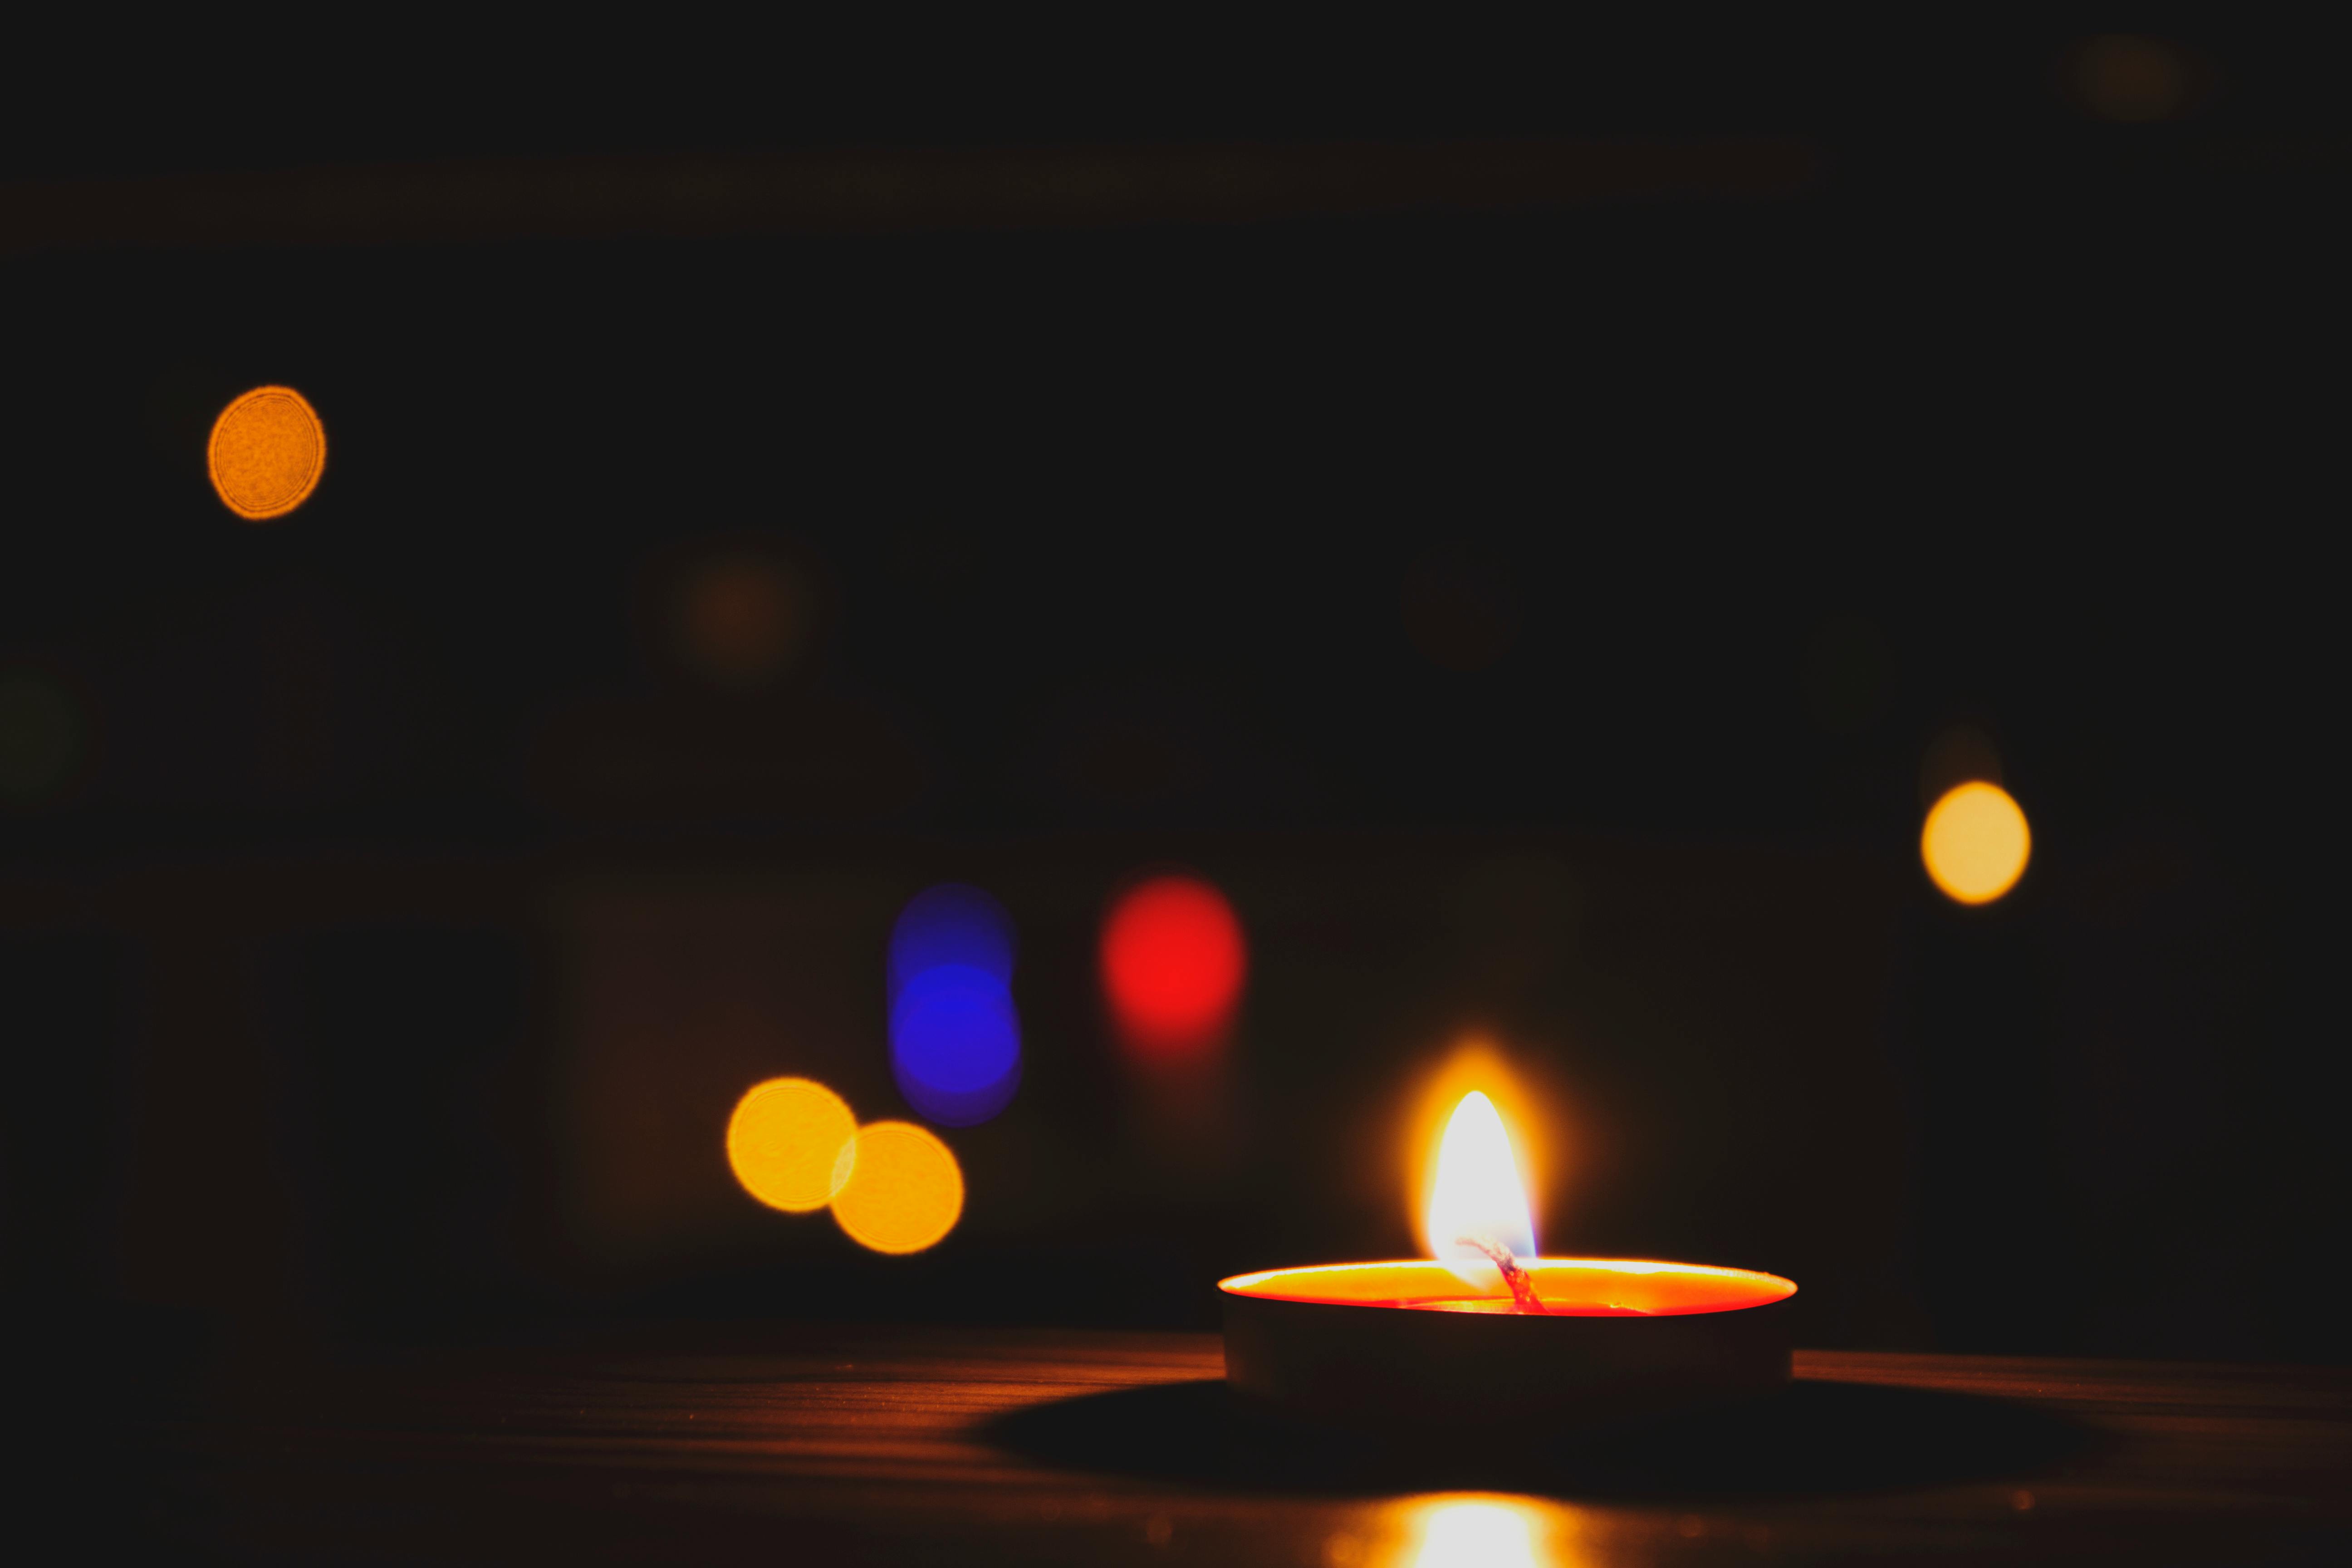 Candle Light Photos, Download The BEST Free Candle Light Stock